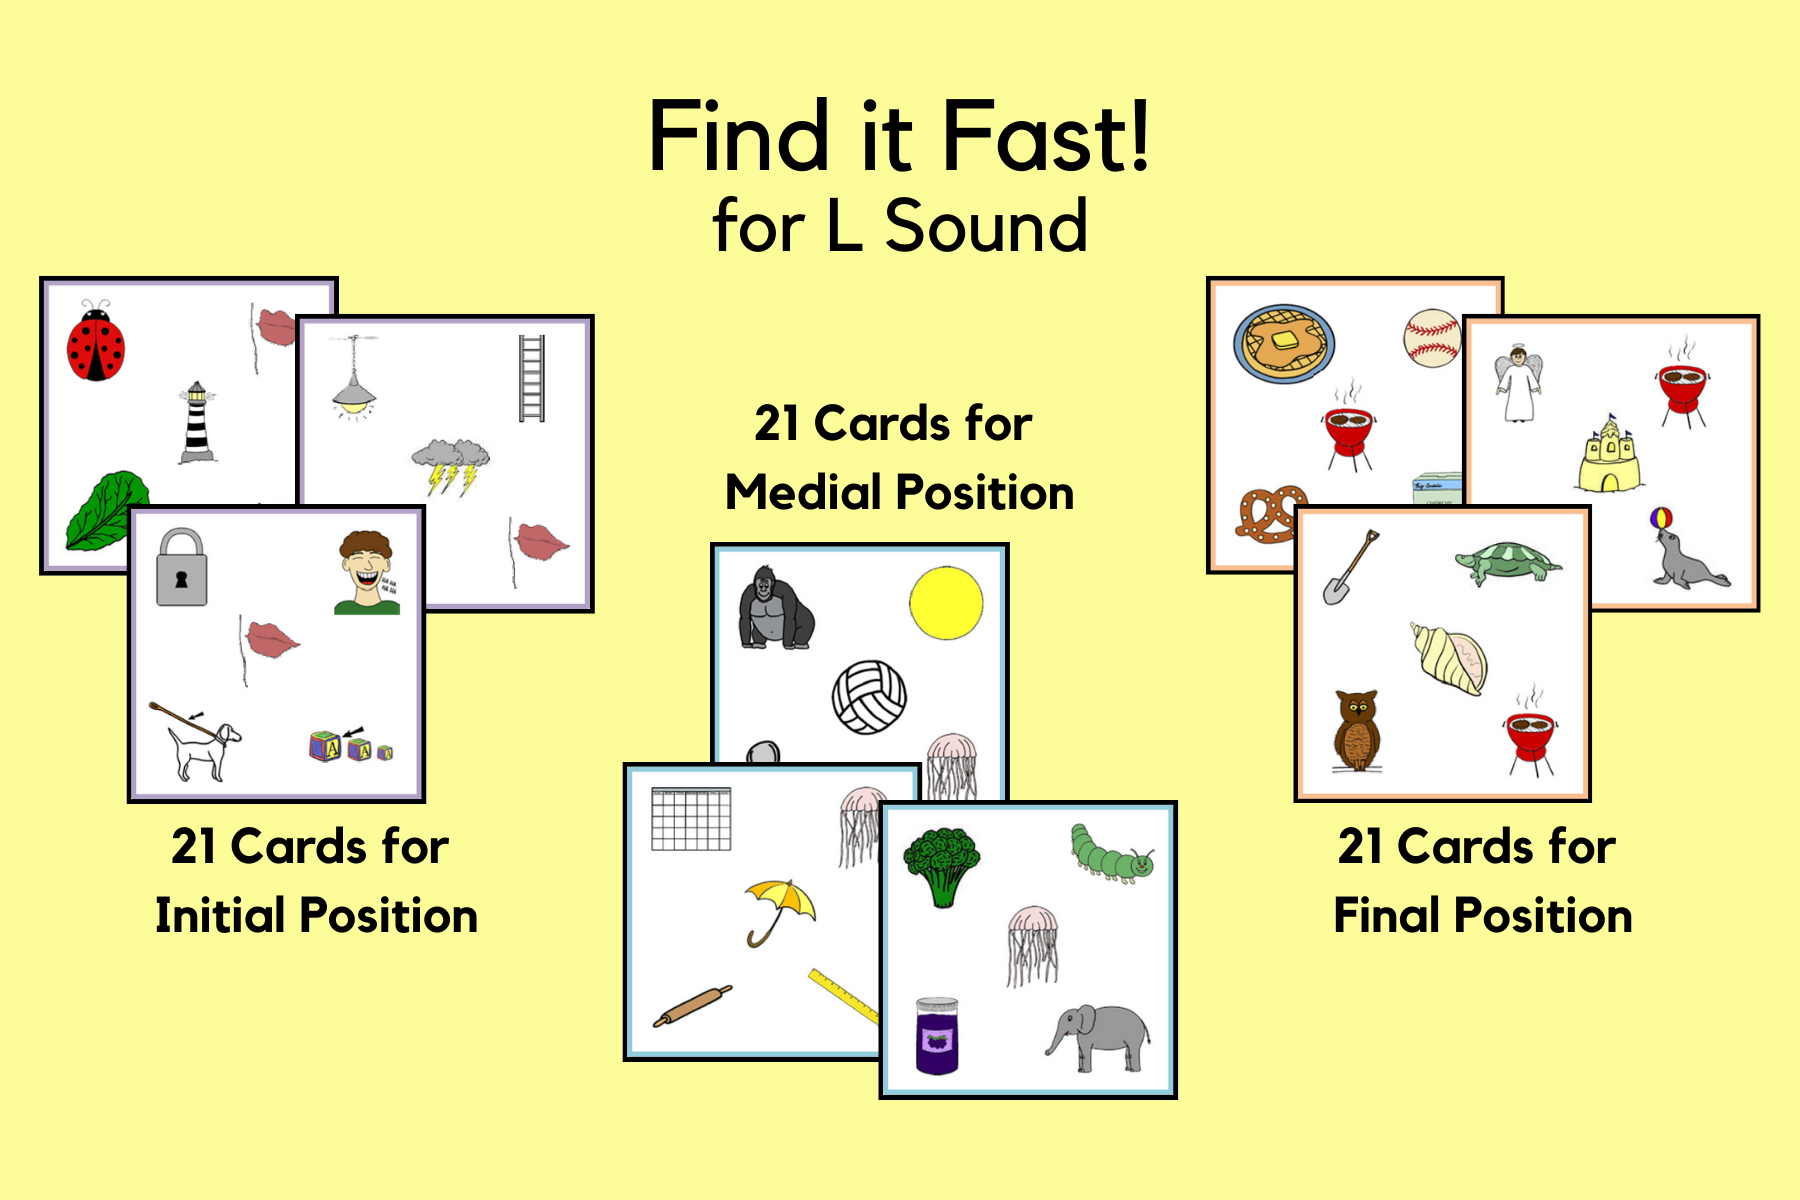 Find It Fast Game for L Sound